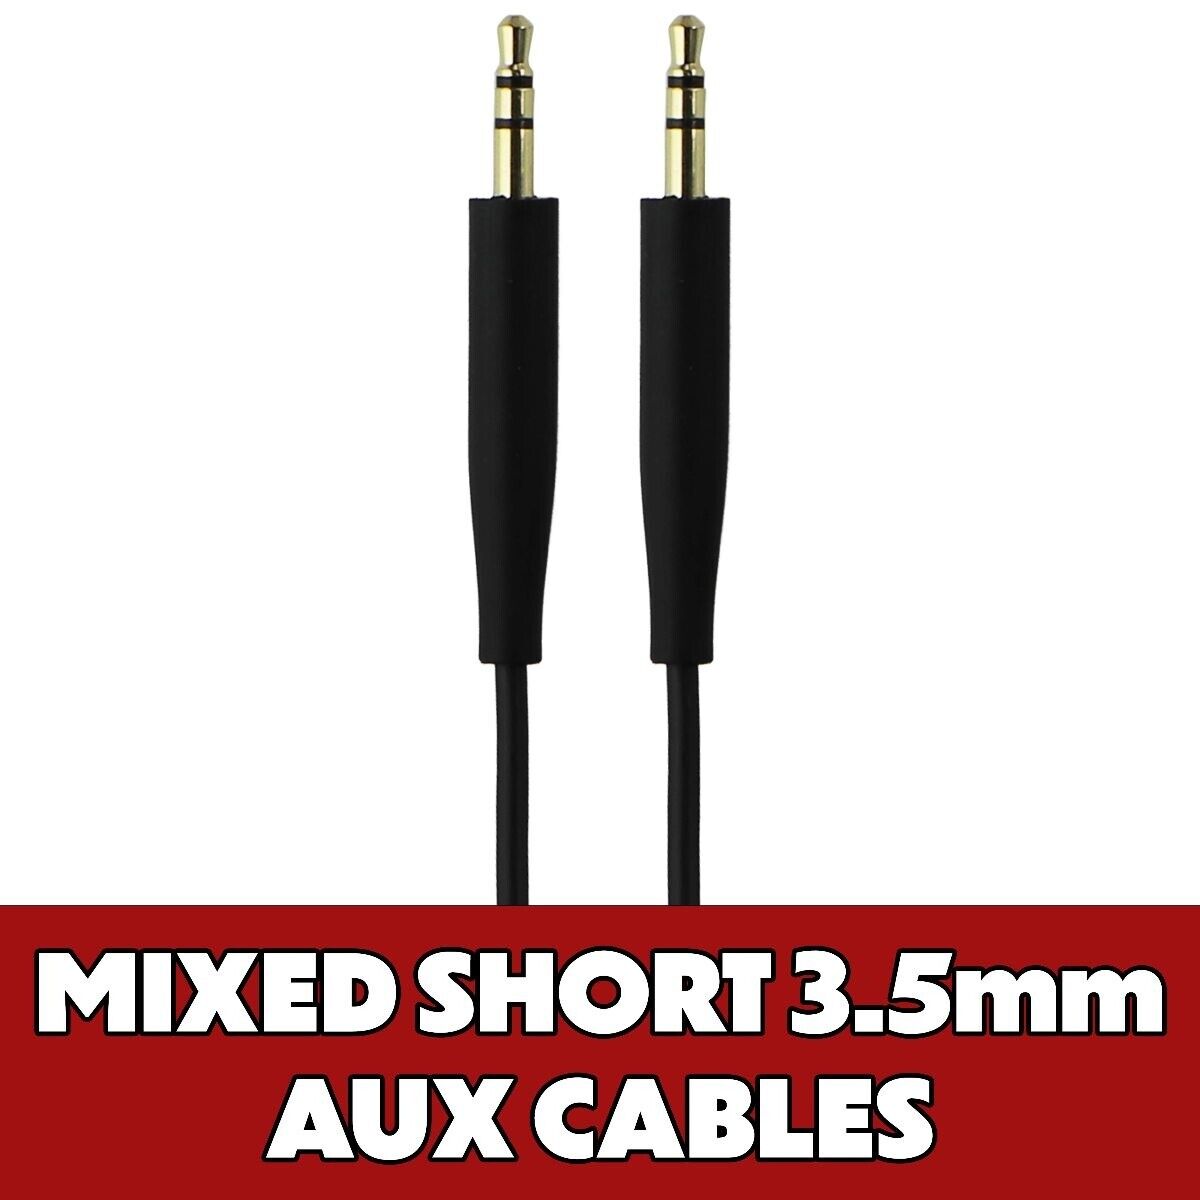 Generic 3.5mm to 3.5mm Short Aux Cables Under 4-foot - Mixed Color/Style/Length